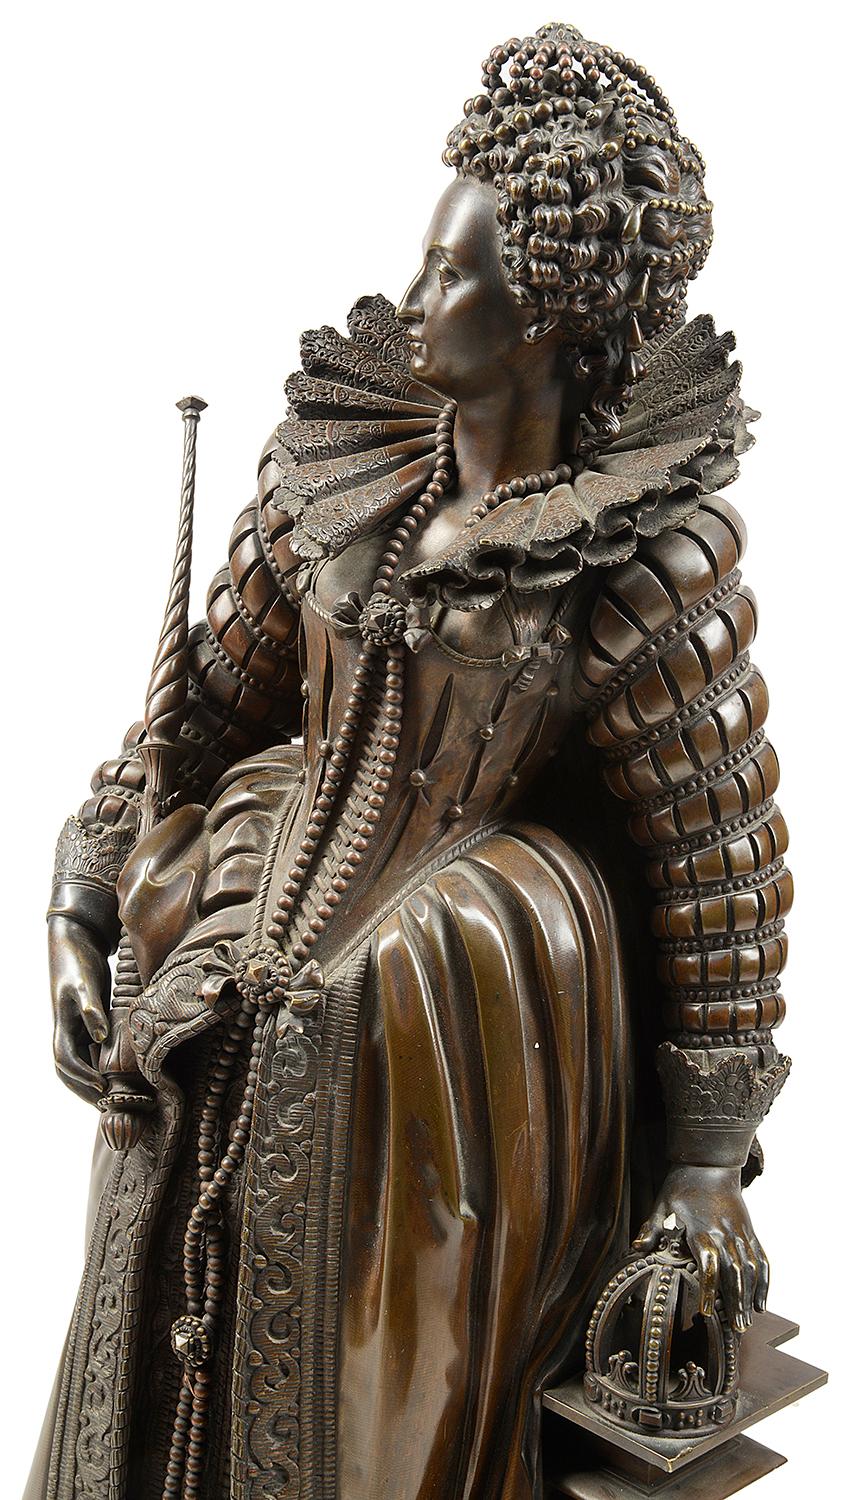 French Bronze Statue of Queen Elizabeth 1 by Math. Moreau